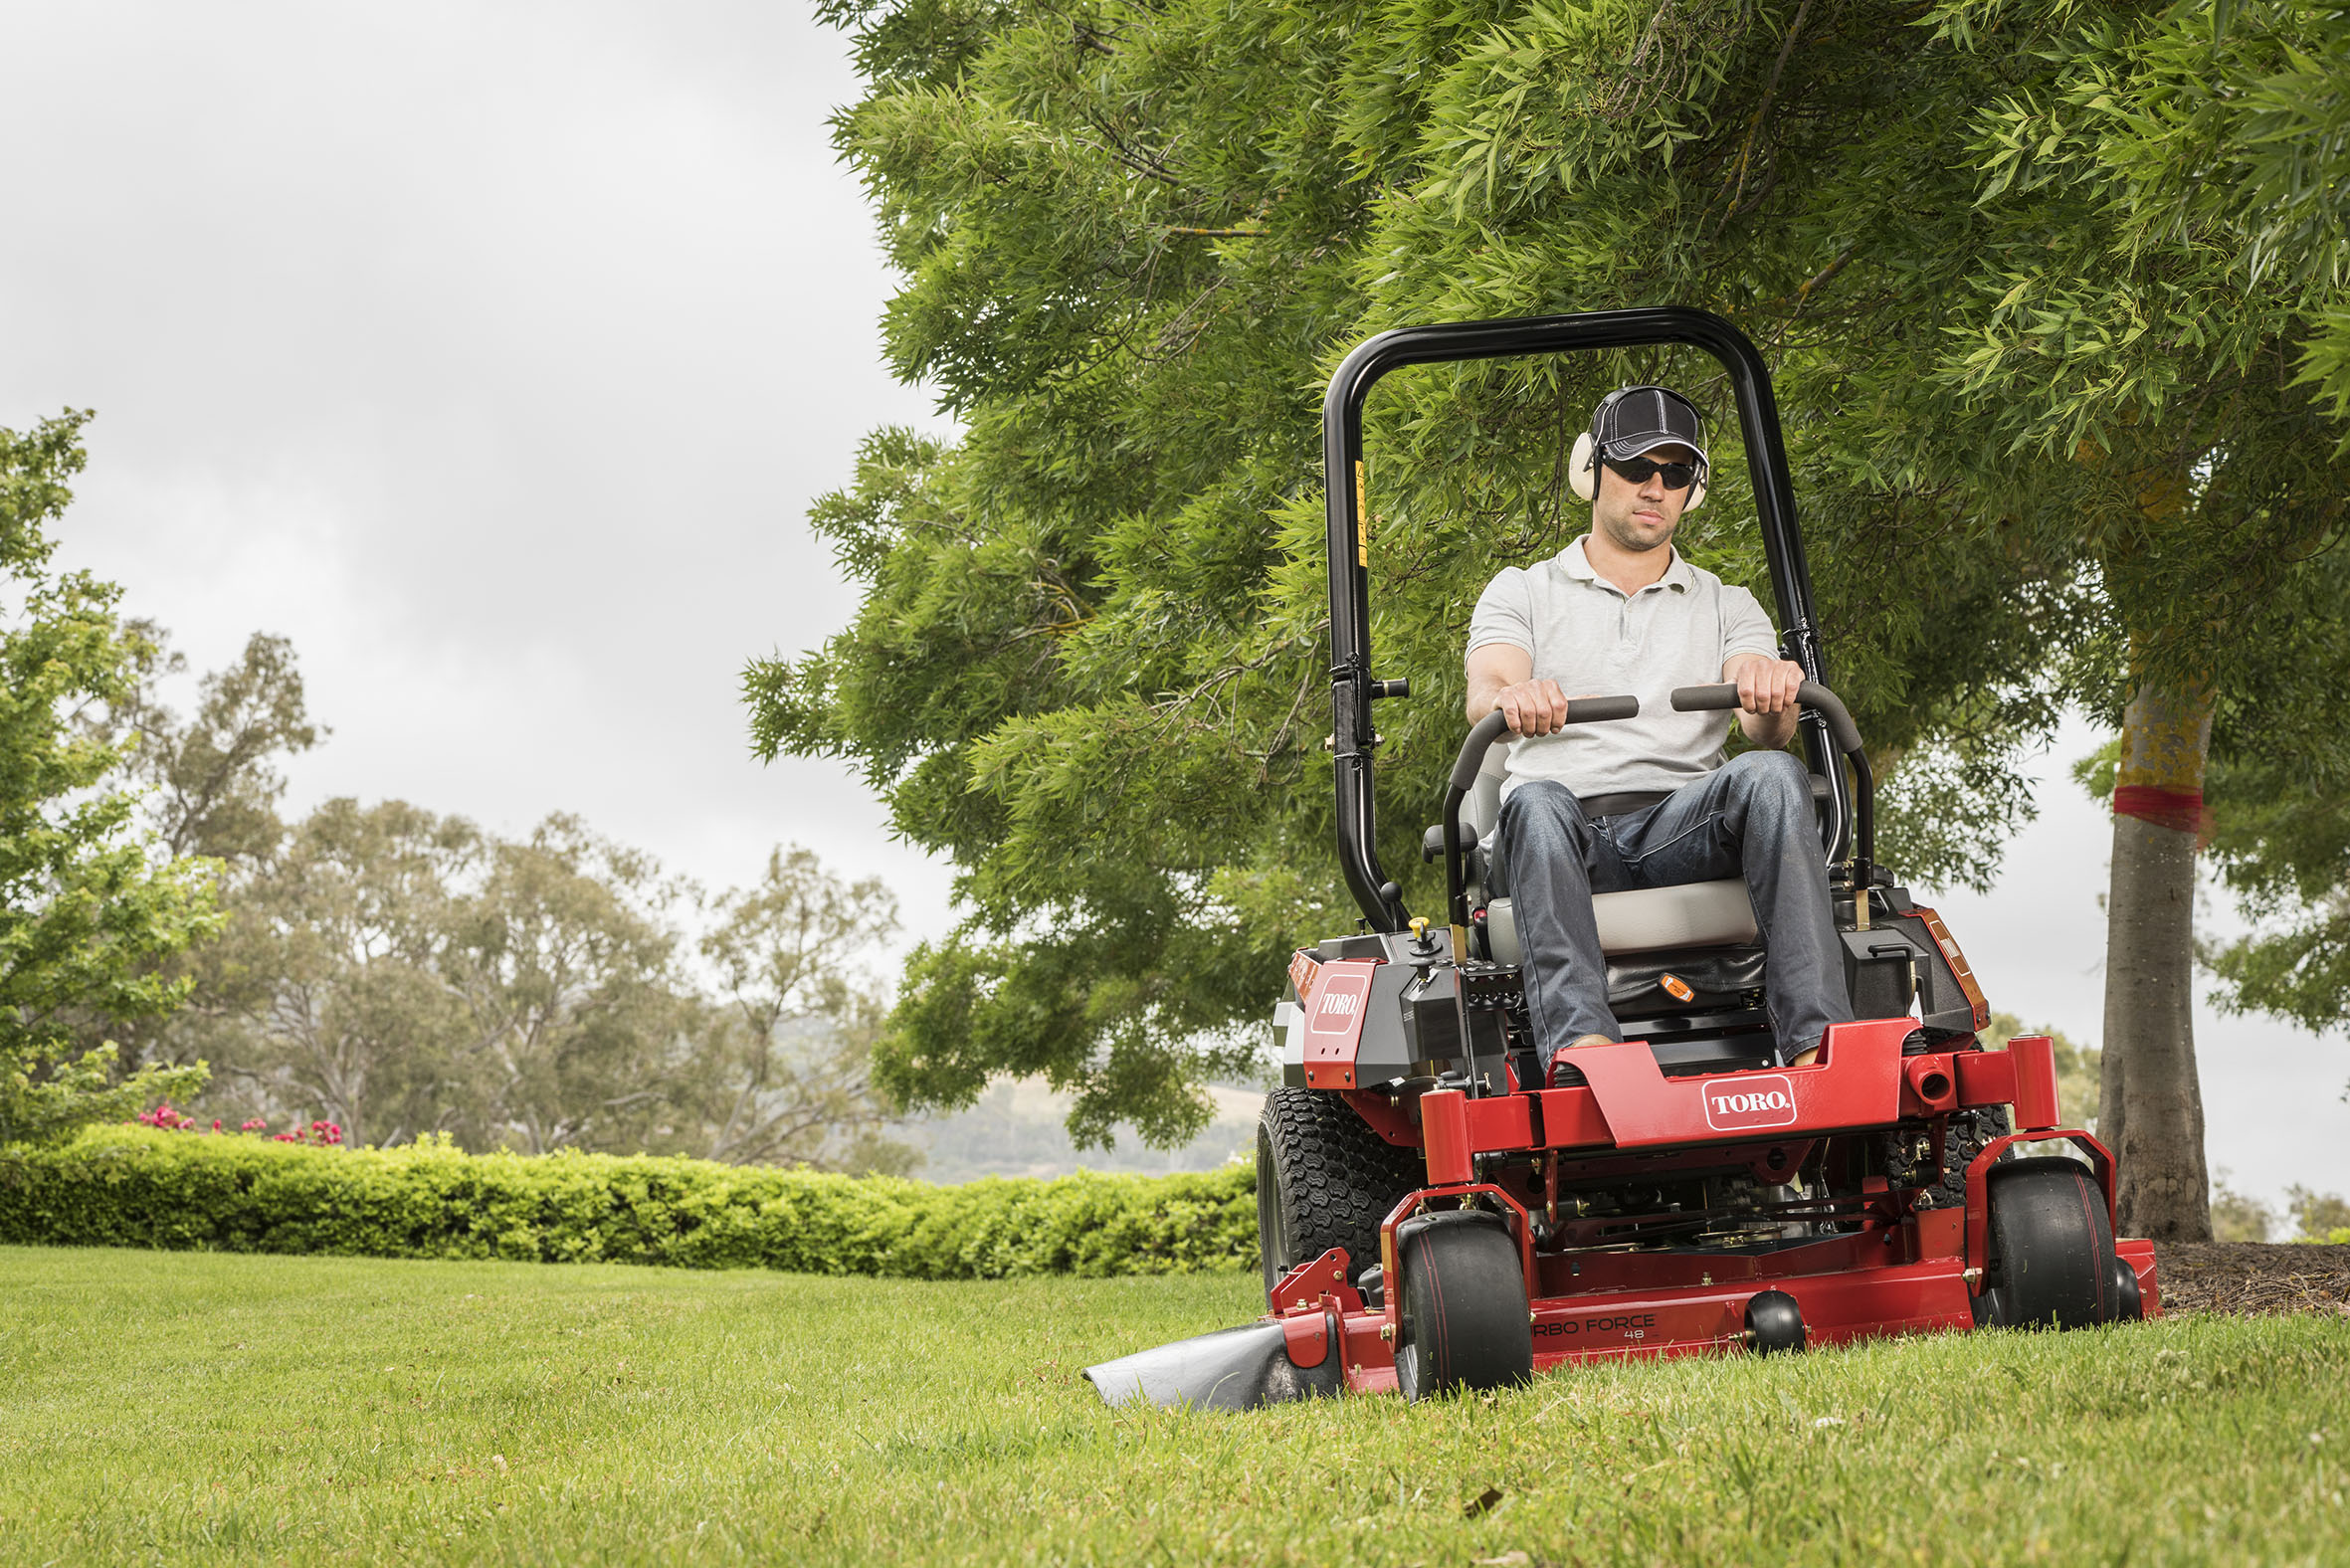 Introducing the new Toro Titan® HD mower with tool carrying versatility